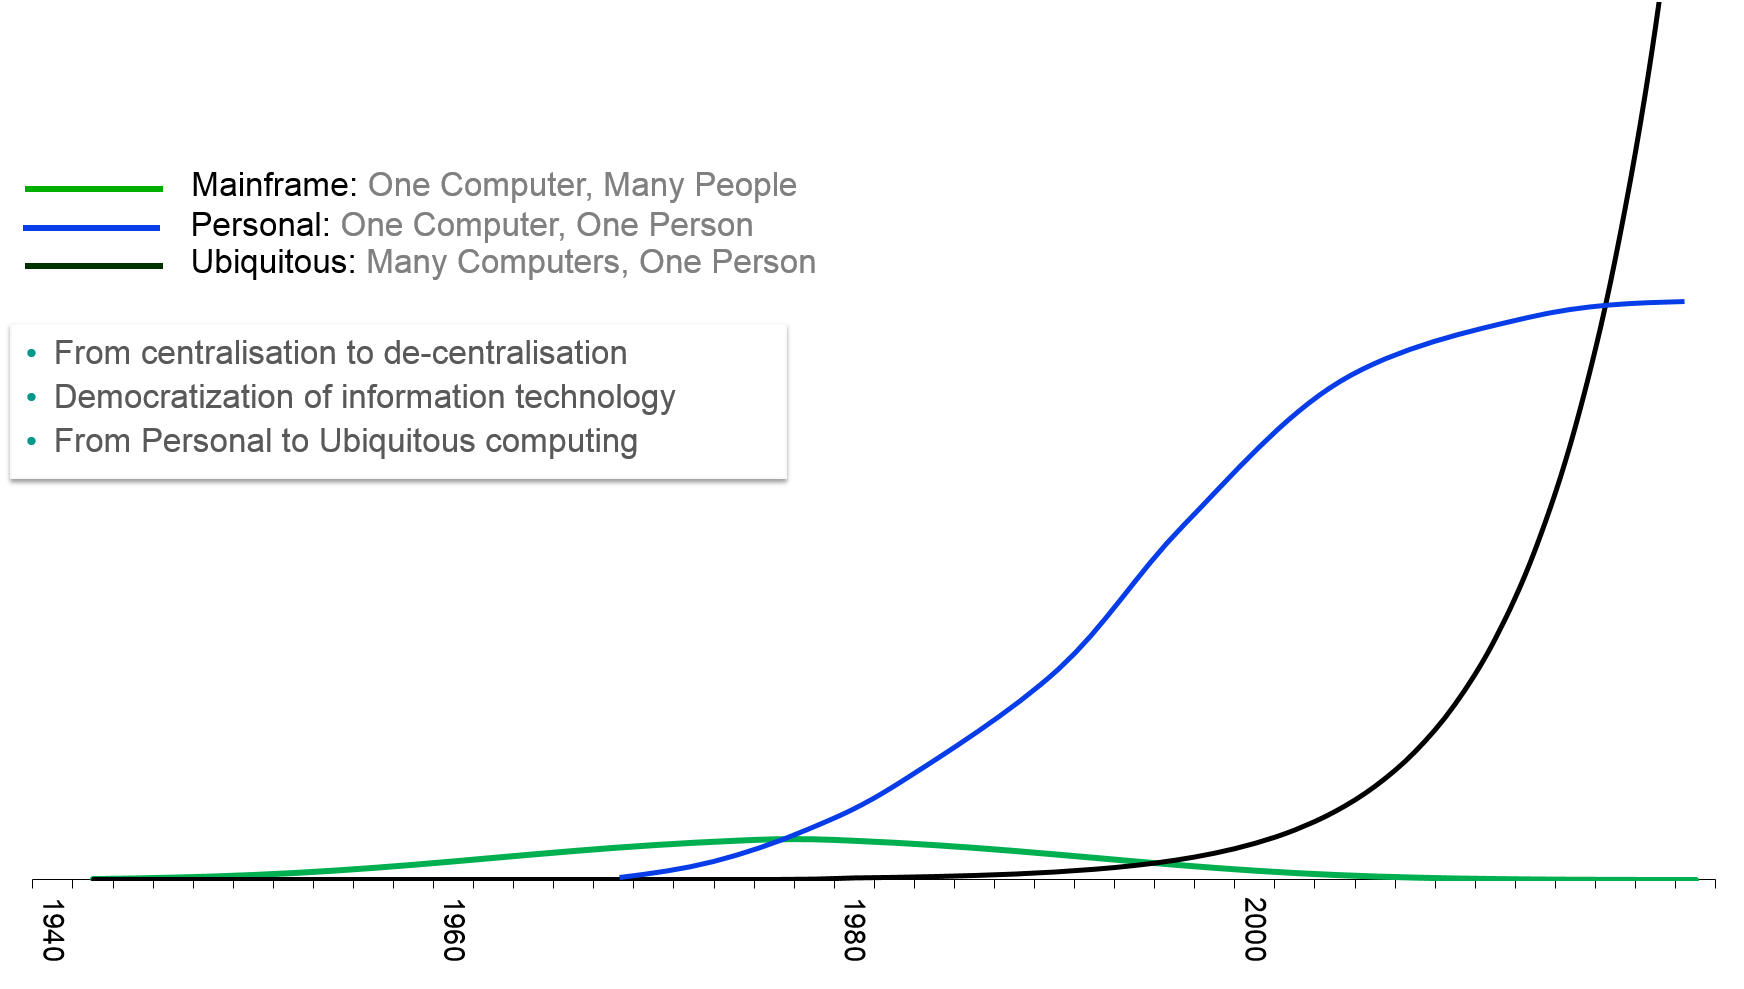 Innovation - Disruption in the computer industry